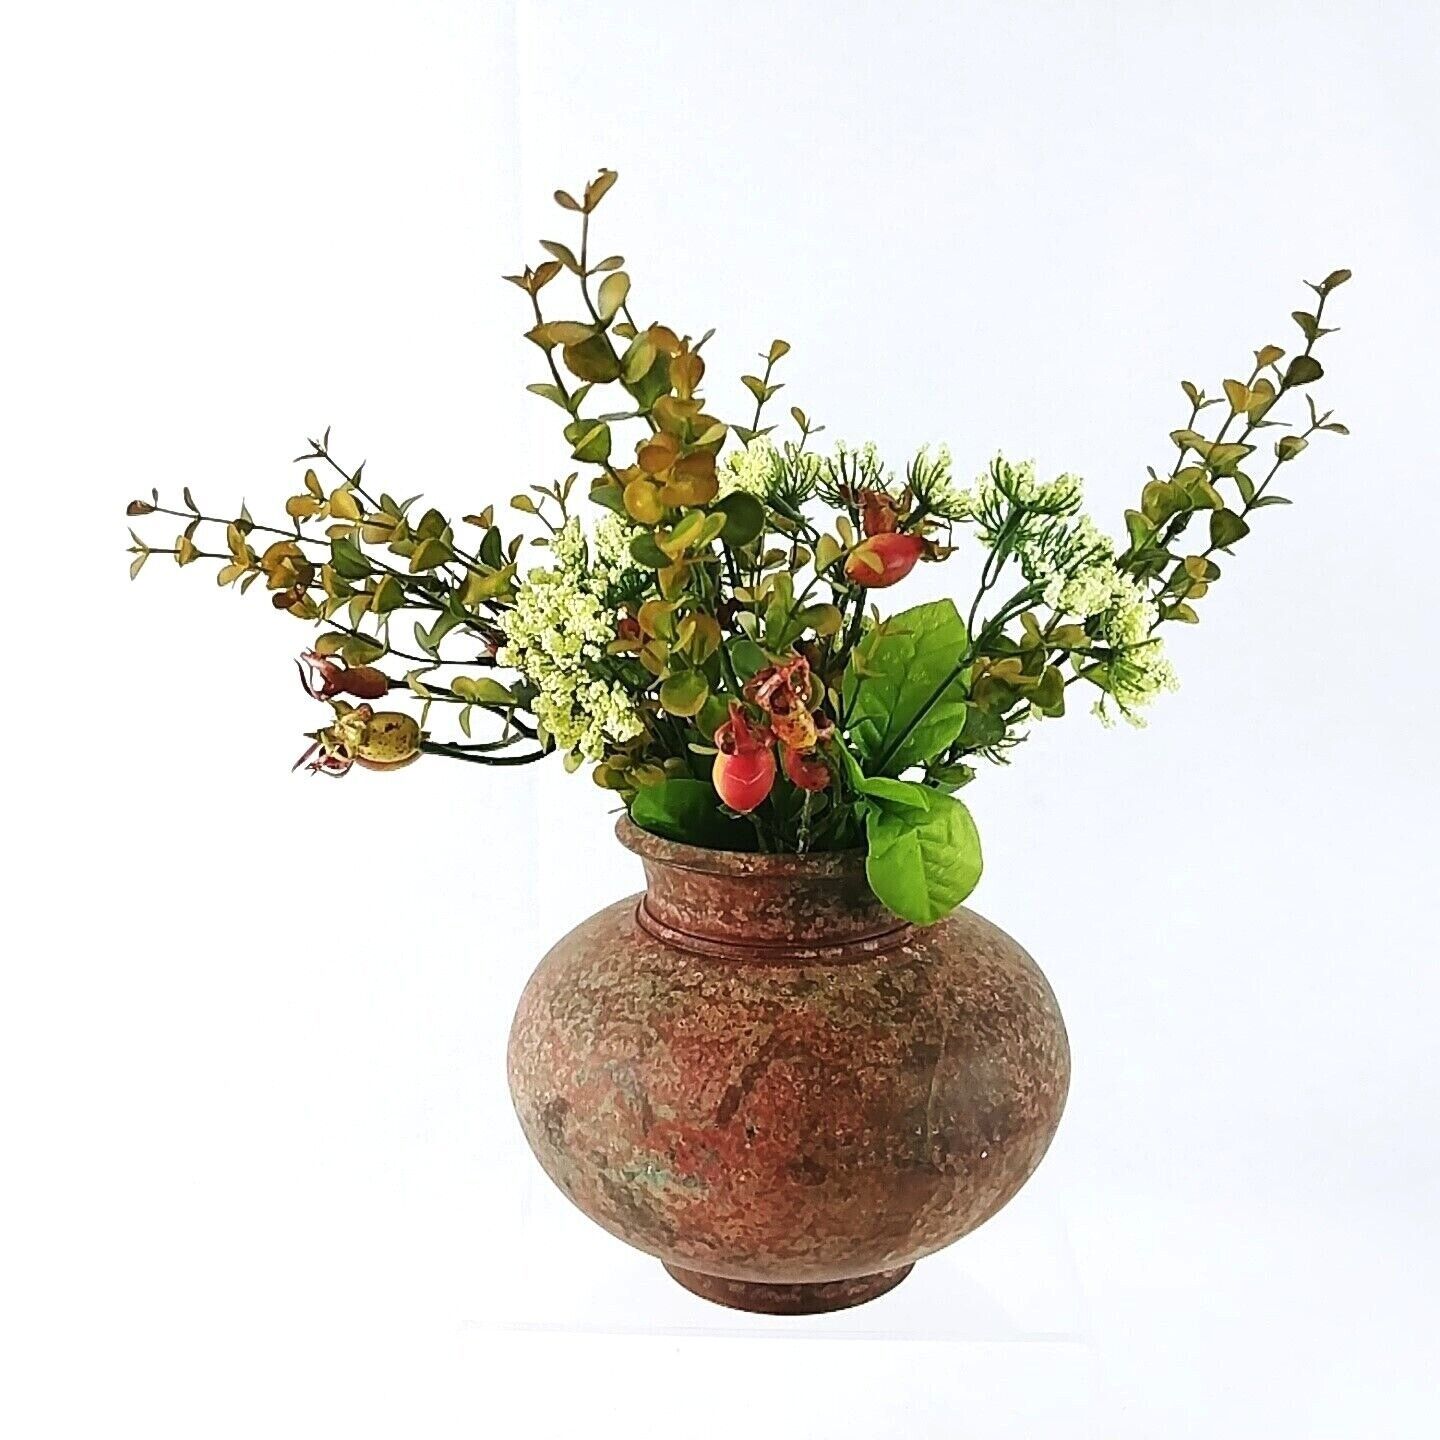 Primary image for Floral Arrangement Home Decor Waterproof Botanicals by Collins Creek Collections